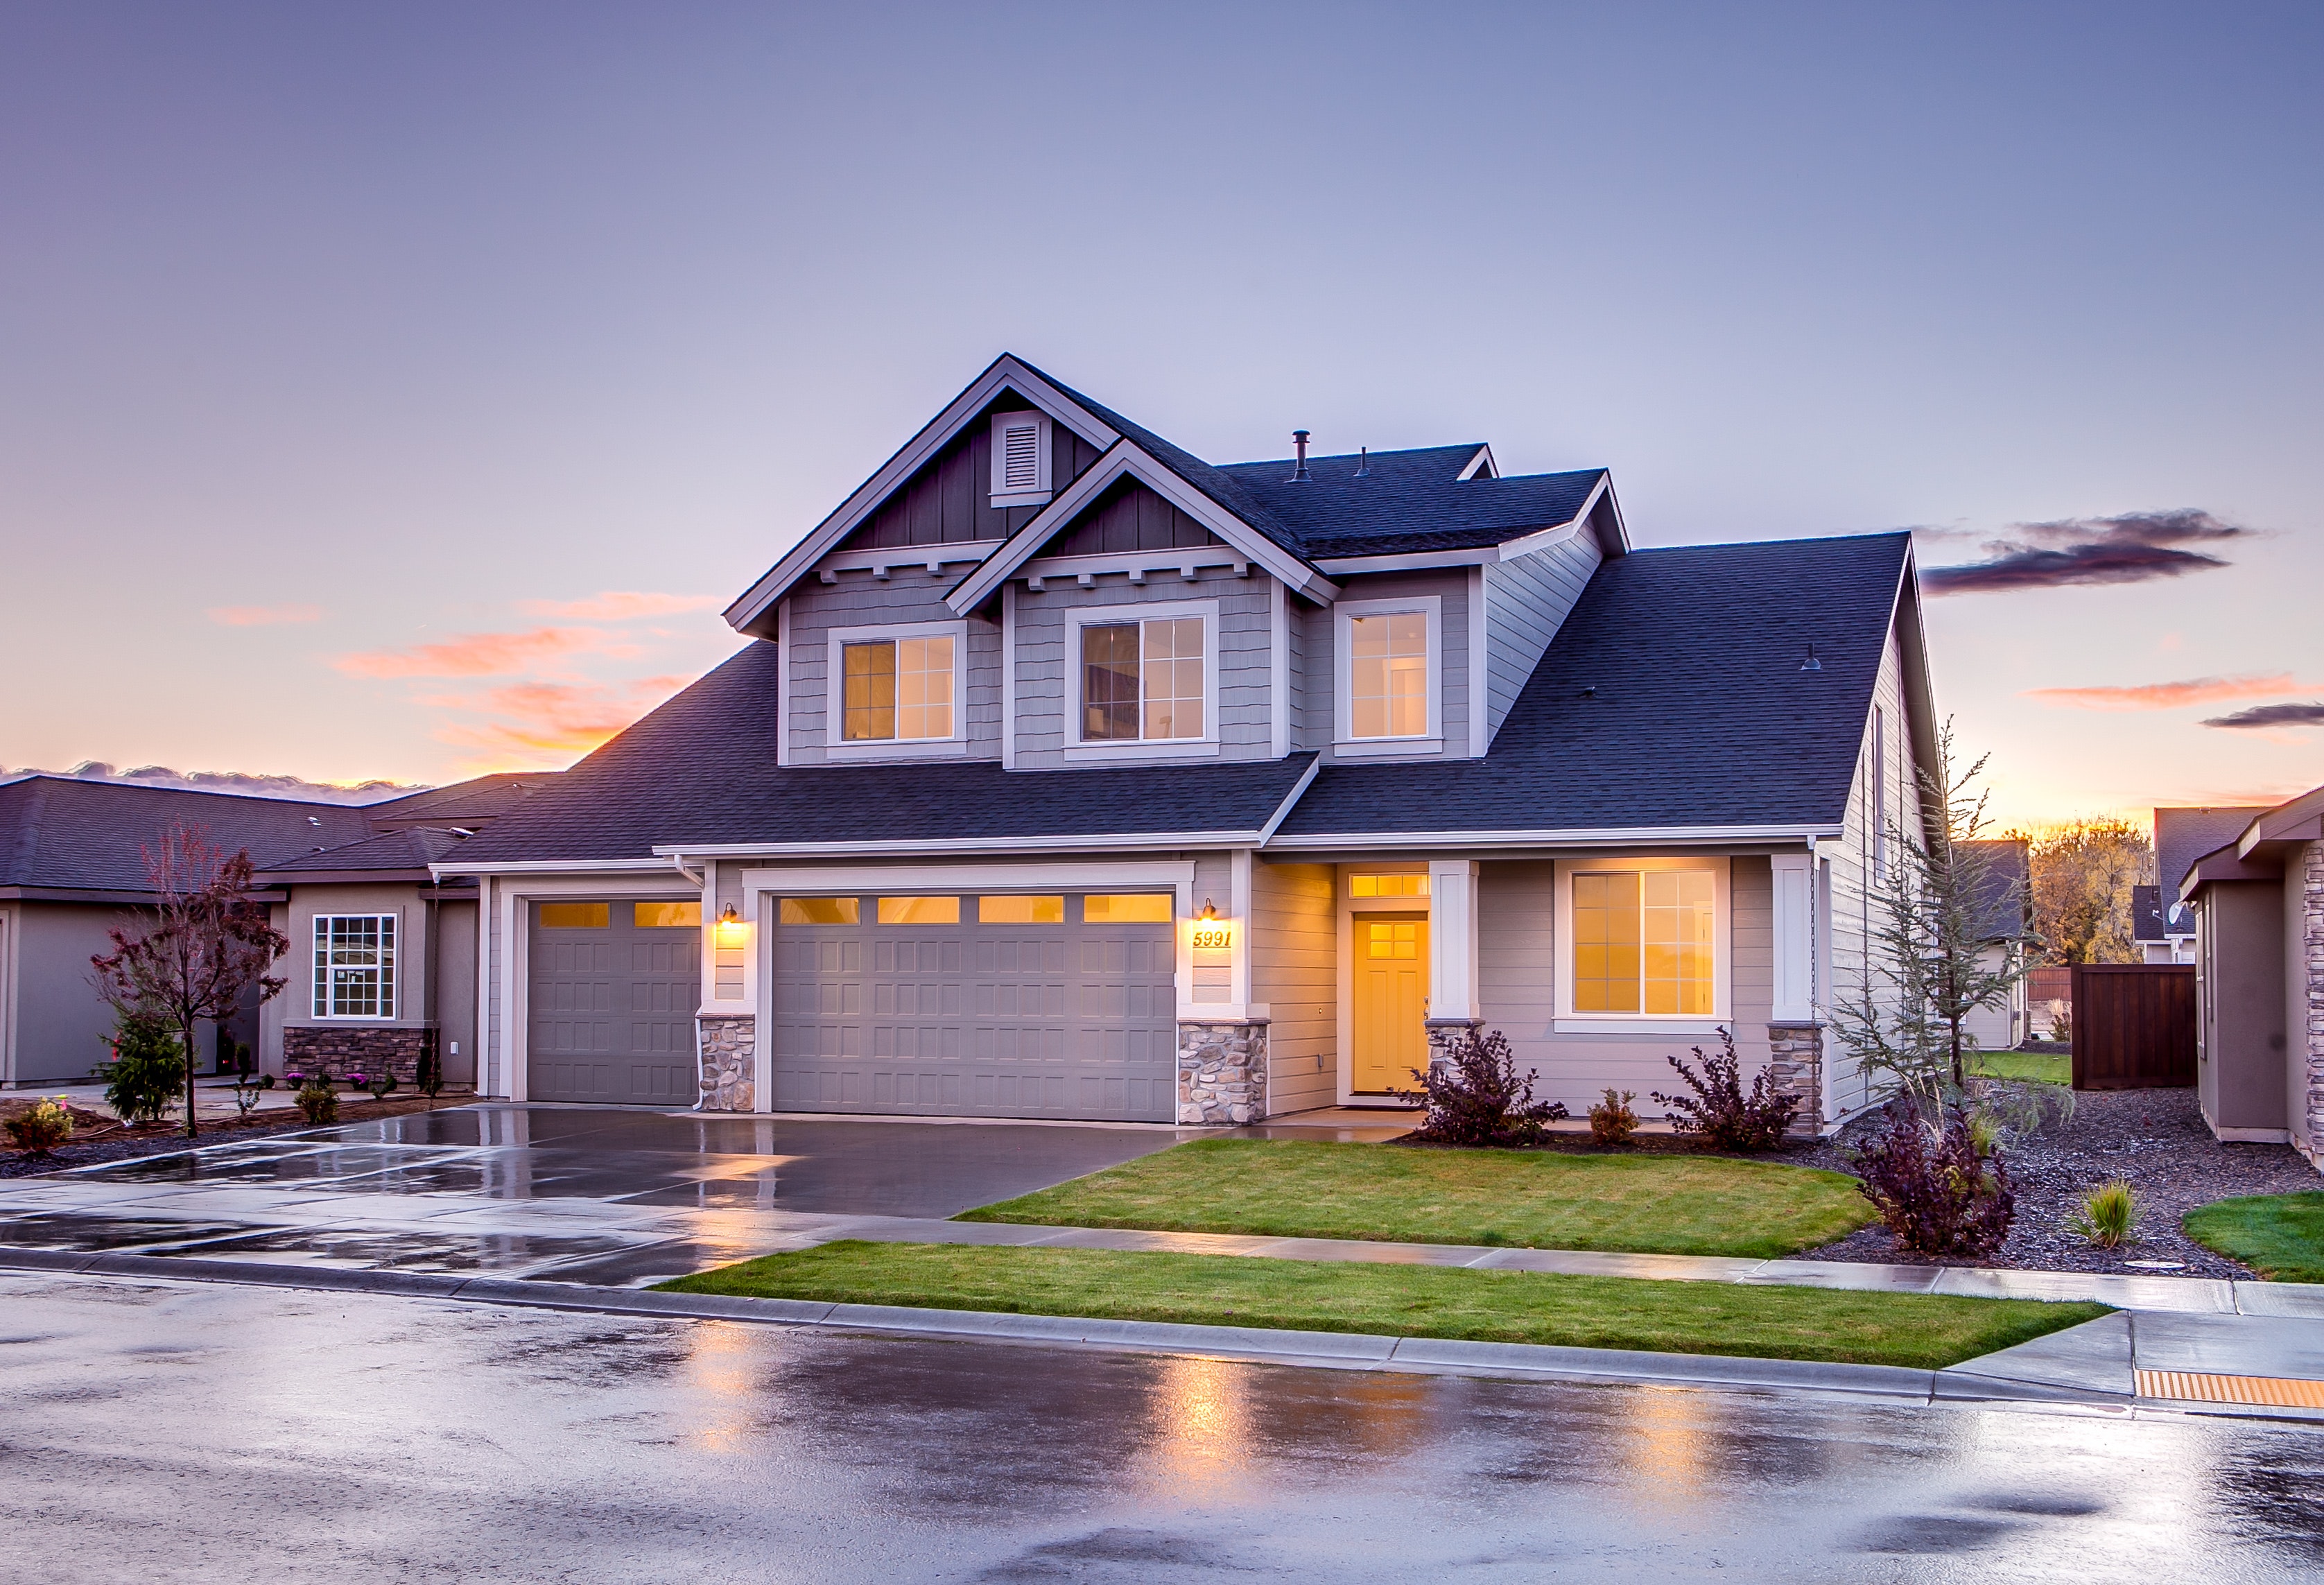 Essential Advice for First-Time Home Sellers: 8 Tips to Maximize Your Sale